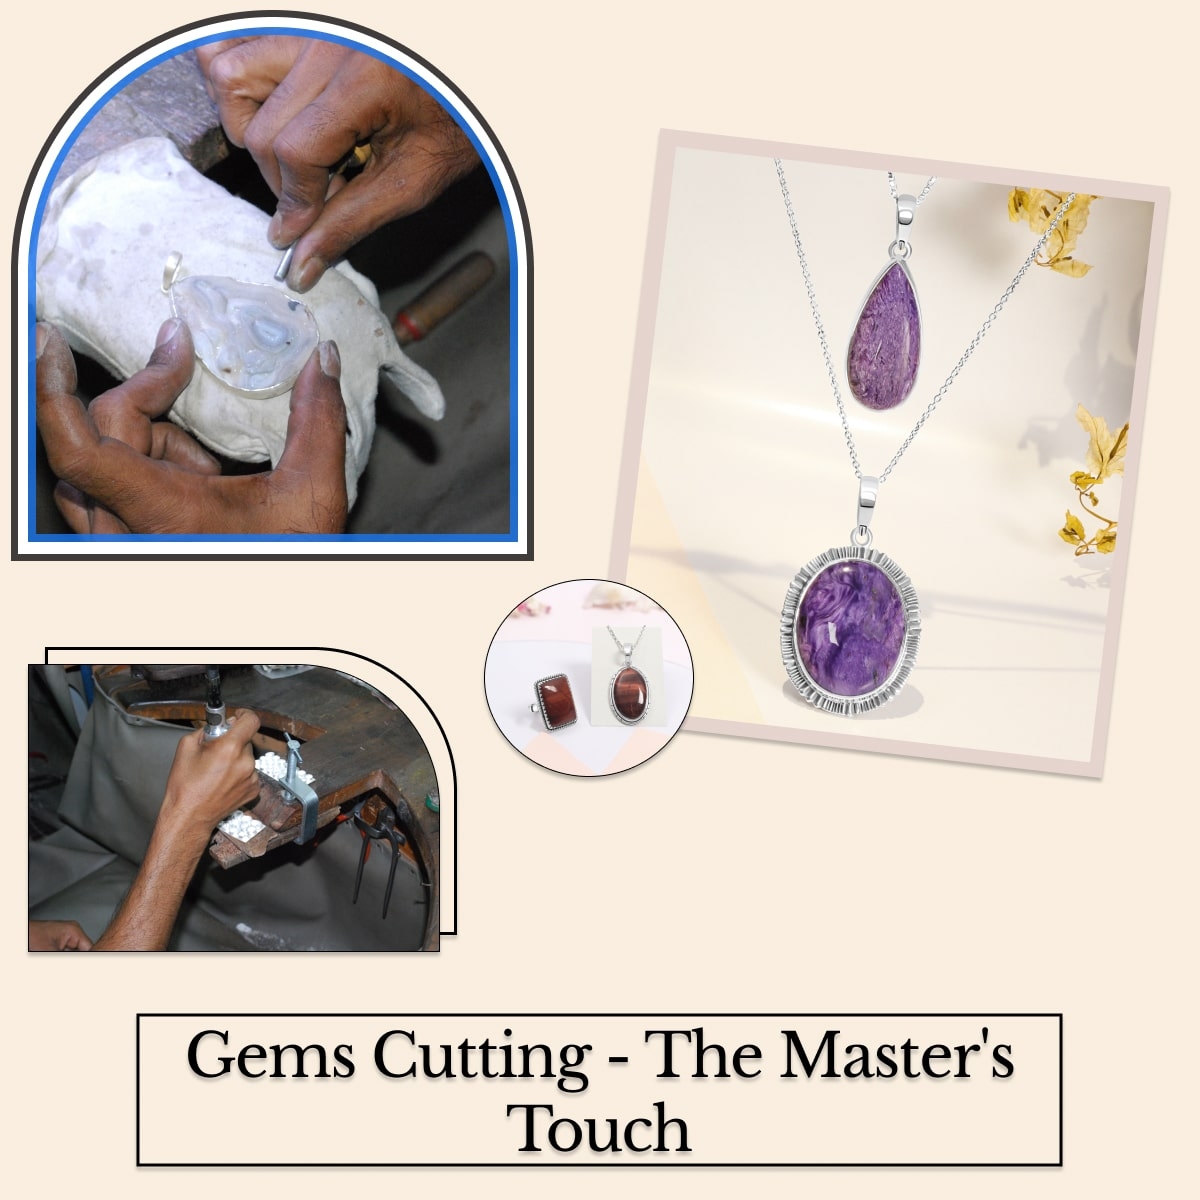 The Art of Gems Cutting - A Master's Touch